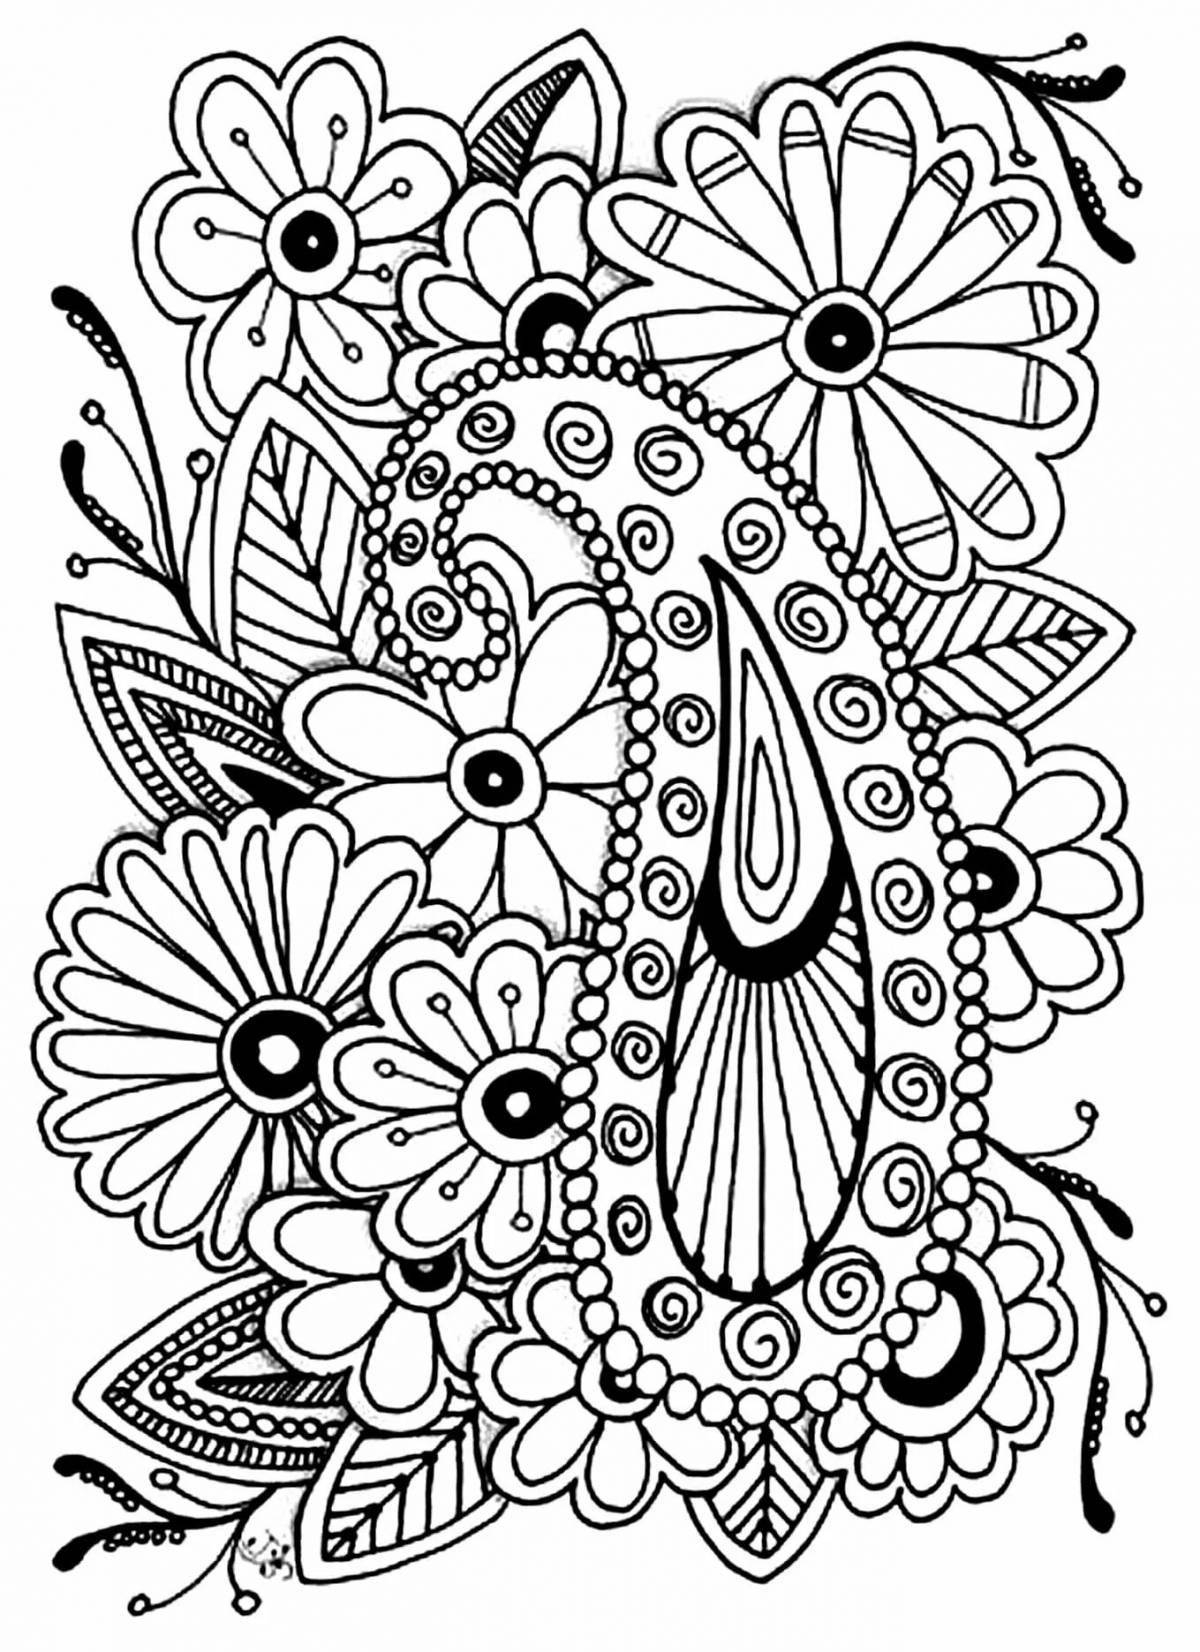 Relaxing art therapy coloring pages for kids